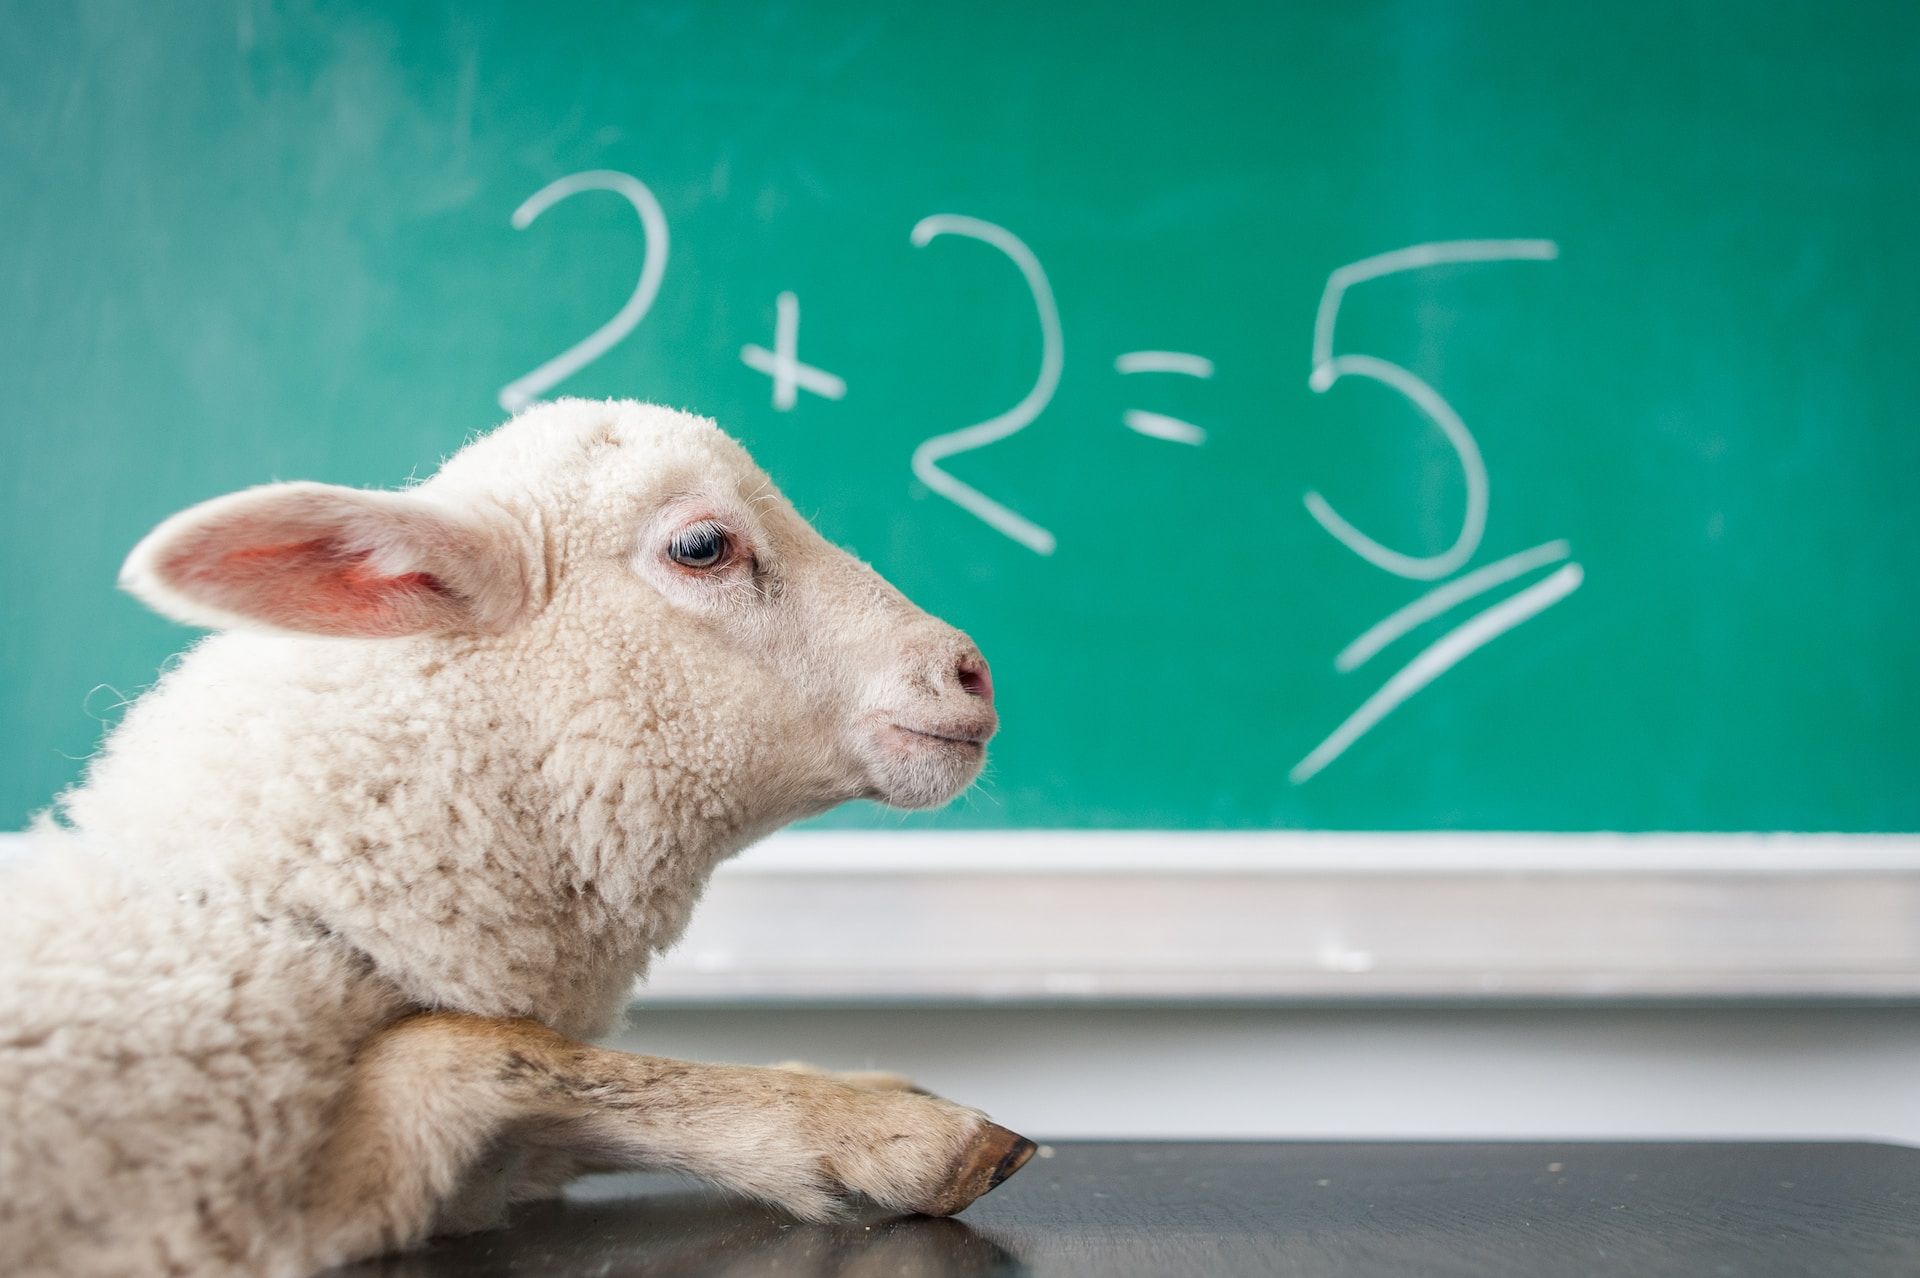 A sheep in front of a blackboard with a wrong math equation displayed